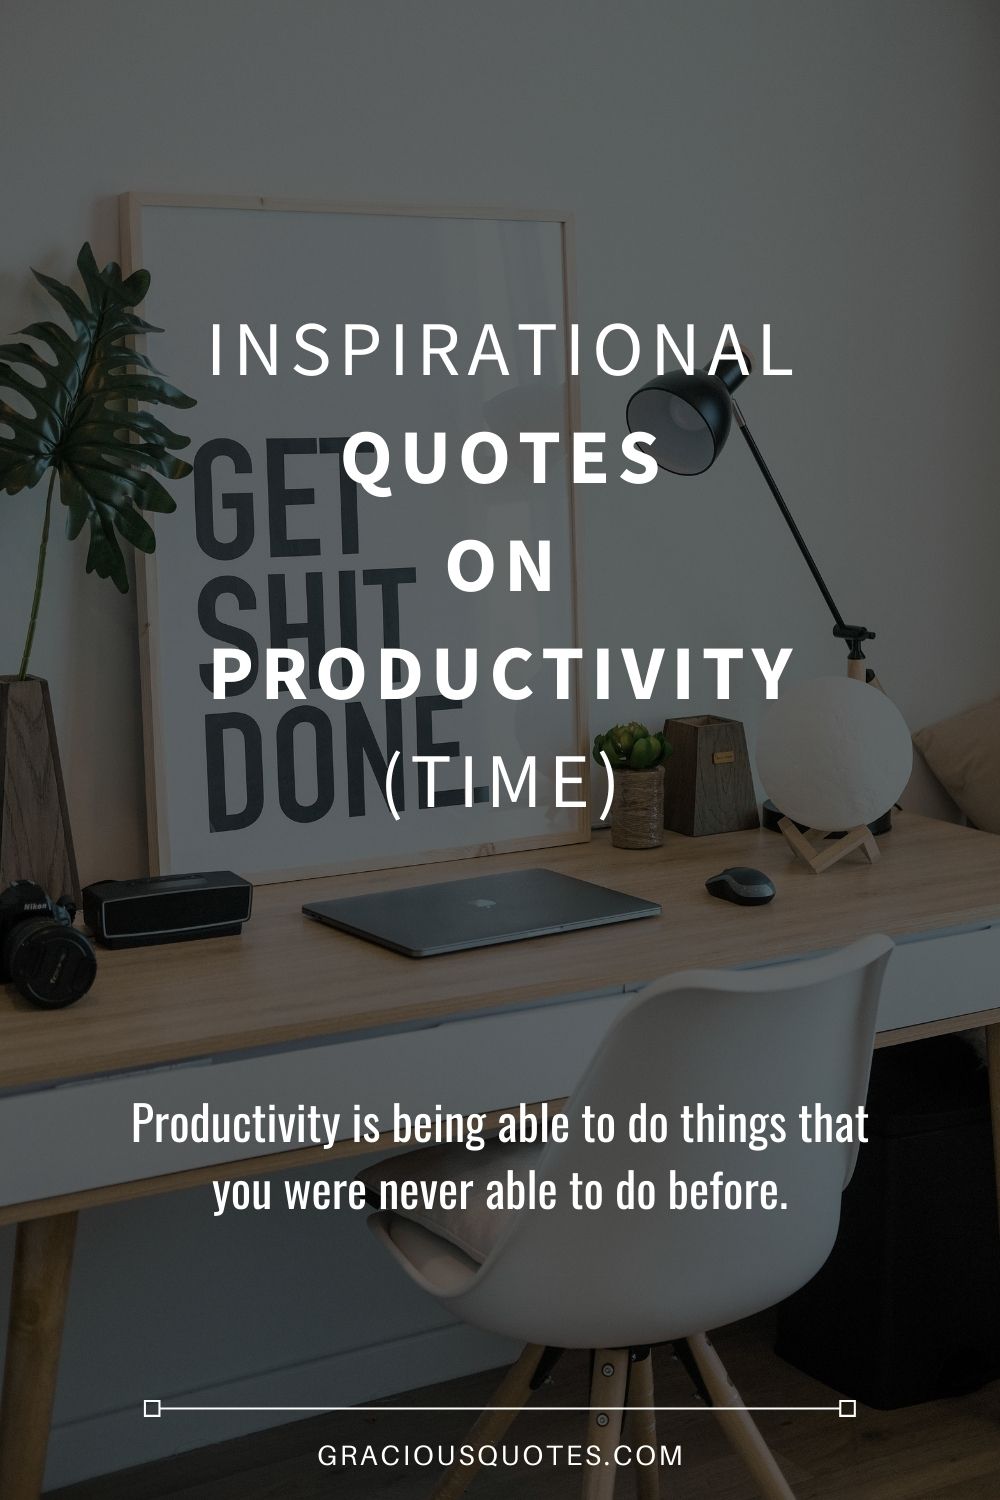 Inspirational Quotes on Productivity (TIME) - Gracious Quotes